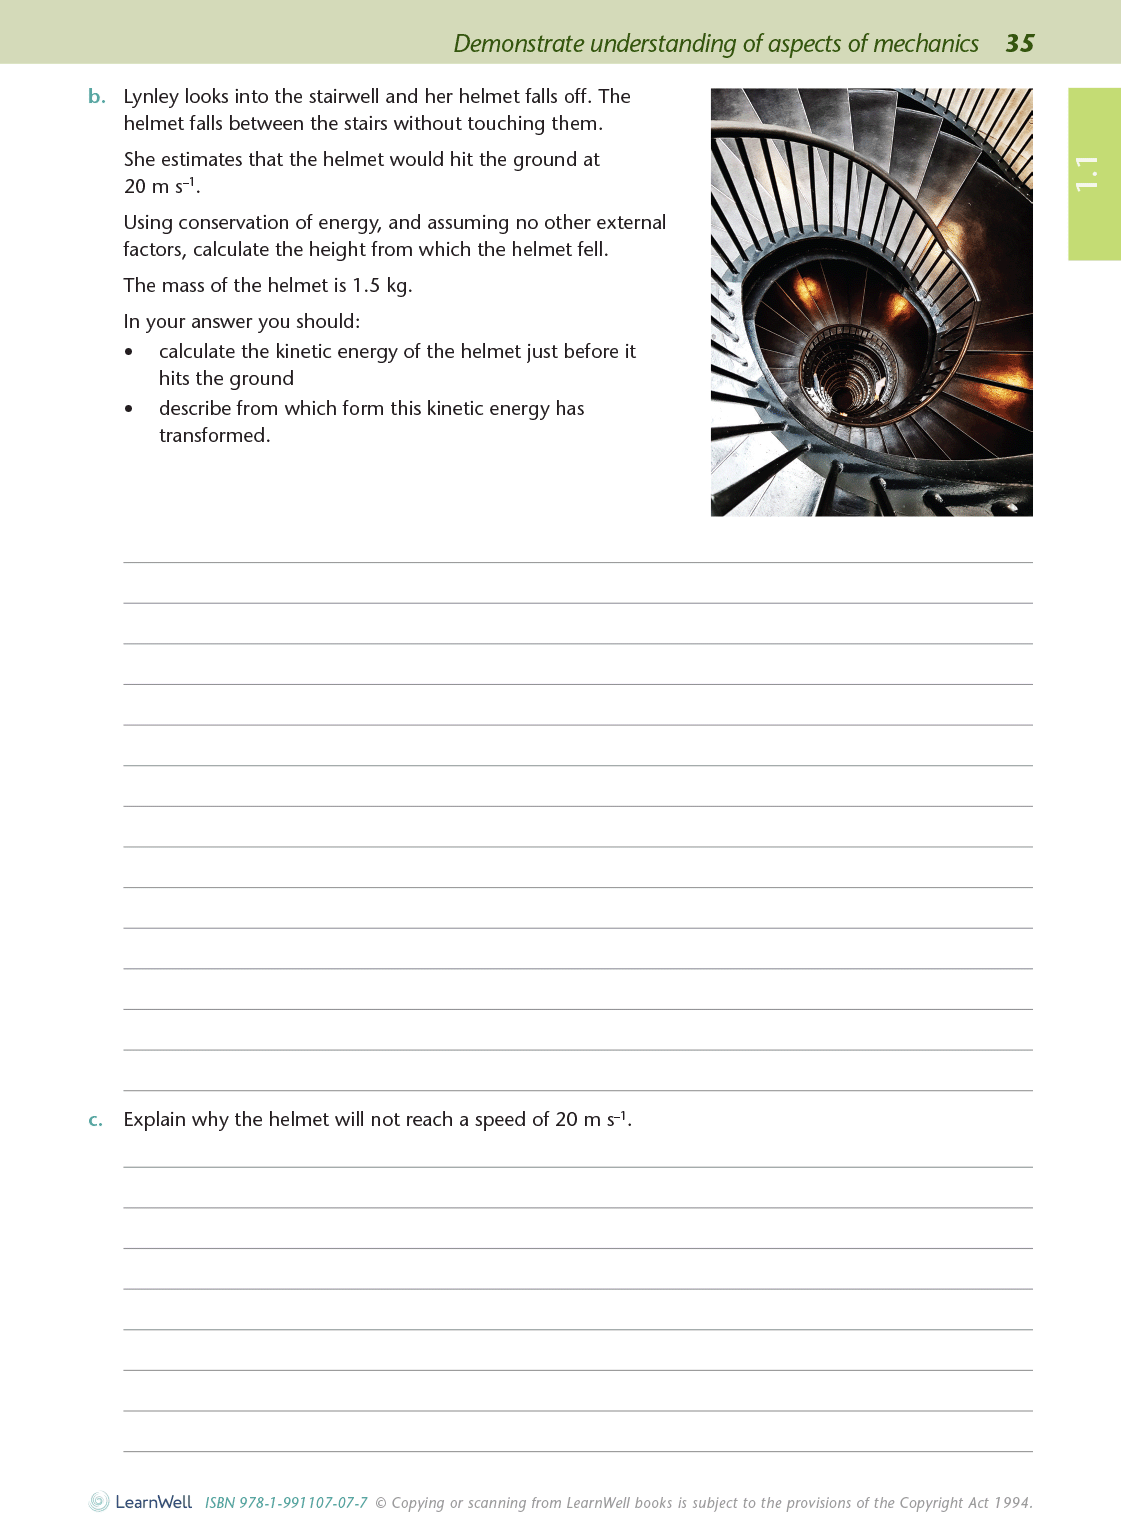 Level 1 Science AME Workbook